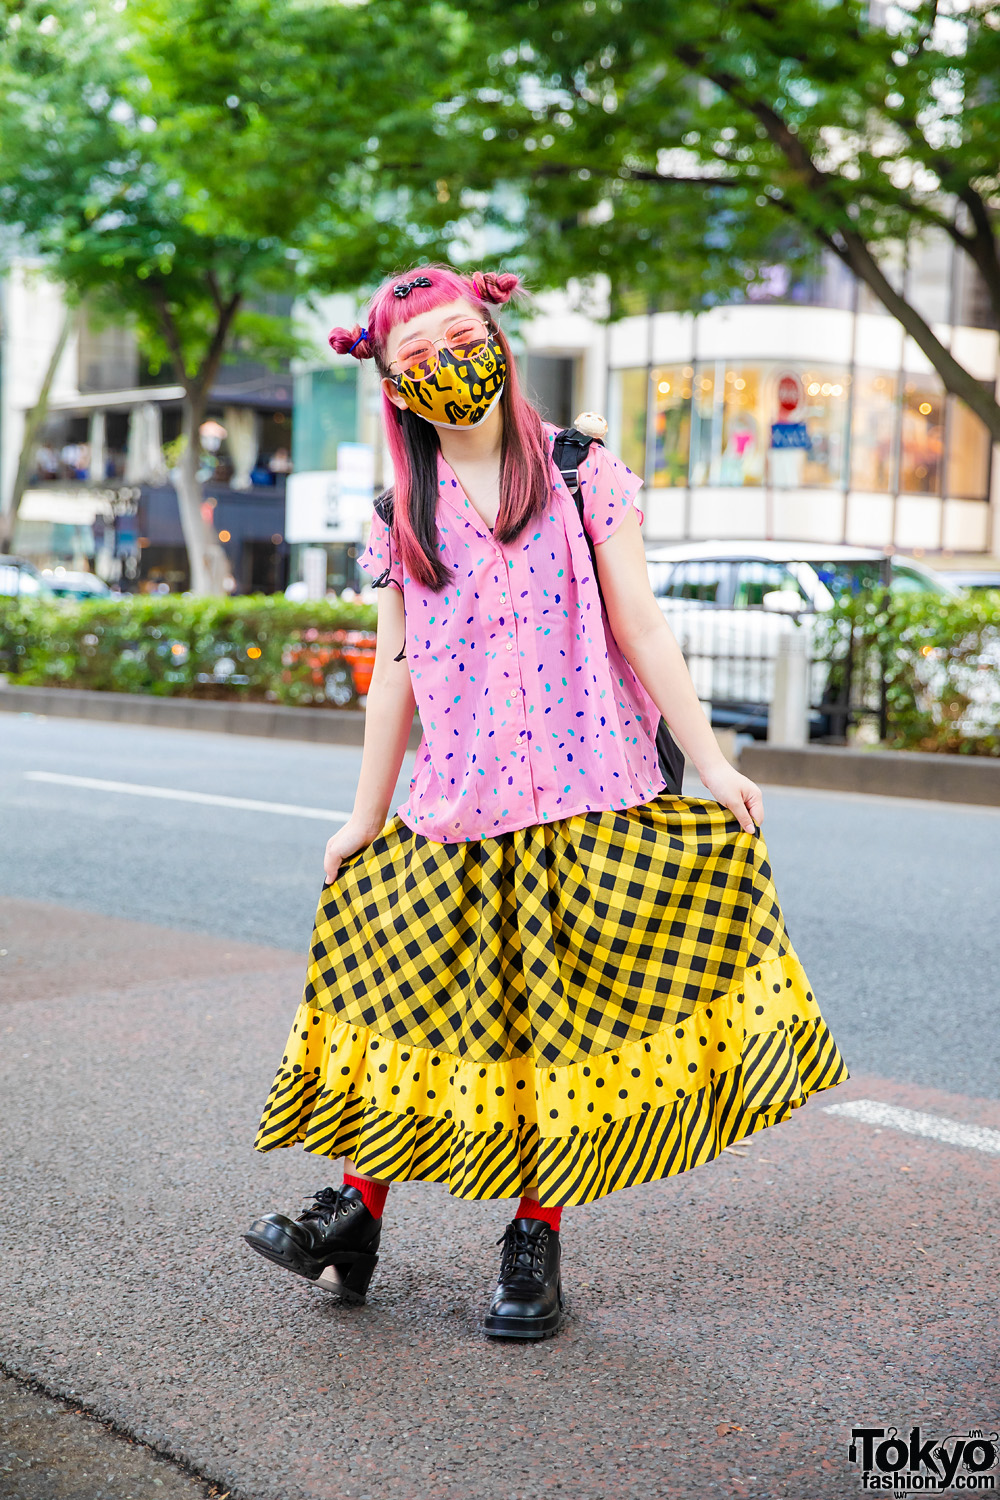 Japanese Cartoonist in Resale Street Style w/ Pink Twin Buns, Confetti Print Shirt, Multi-Print Maxi Skirt, Ben Davis Backpack & Leather Boots